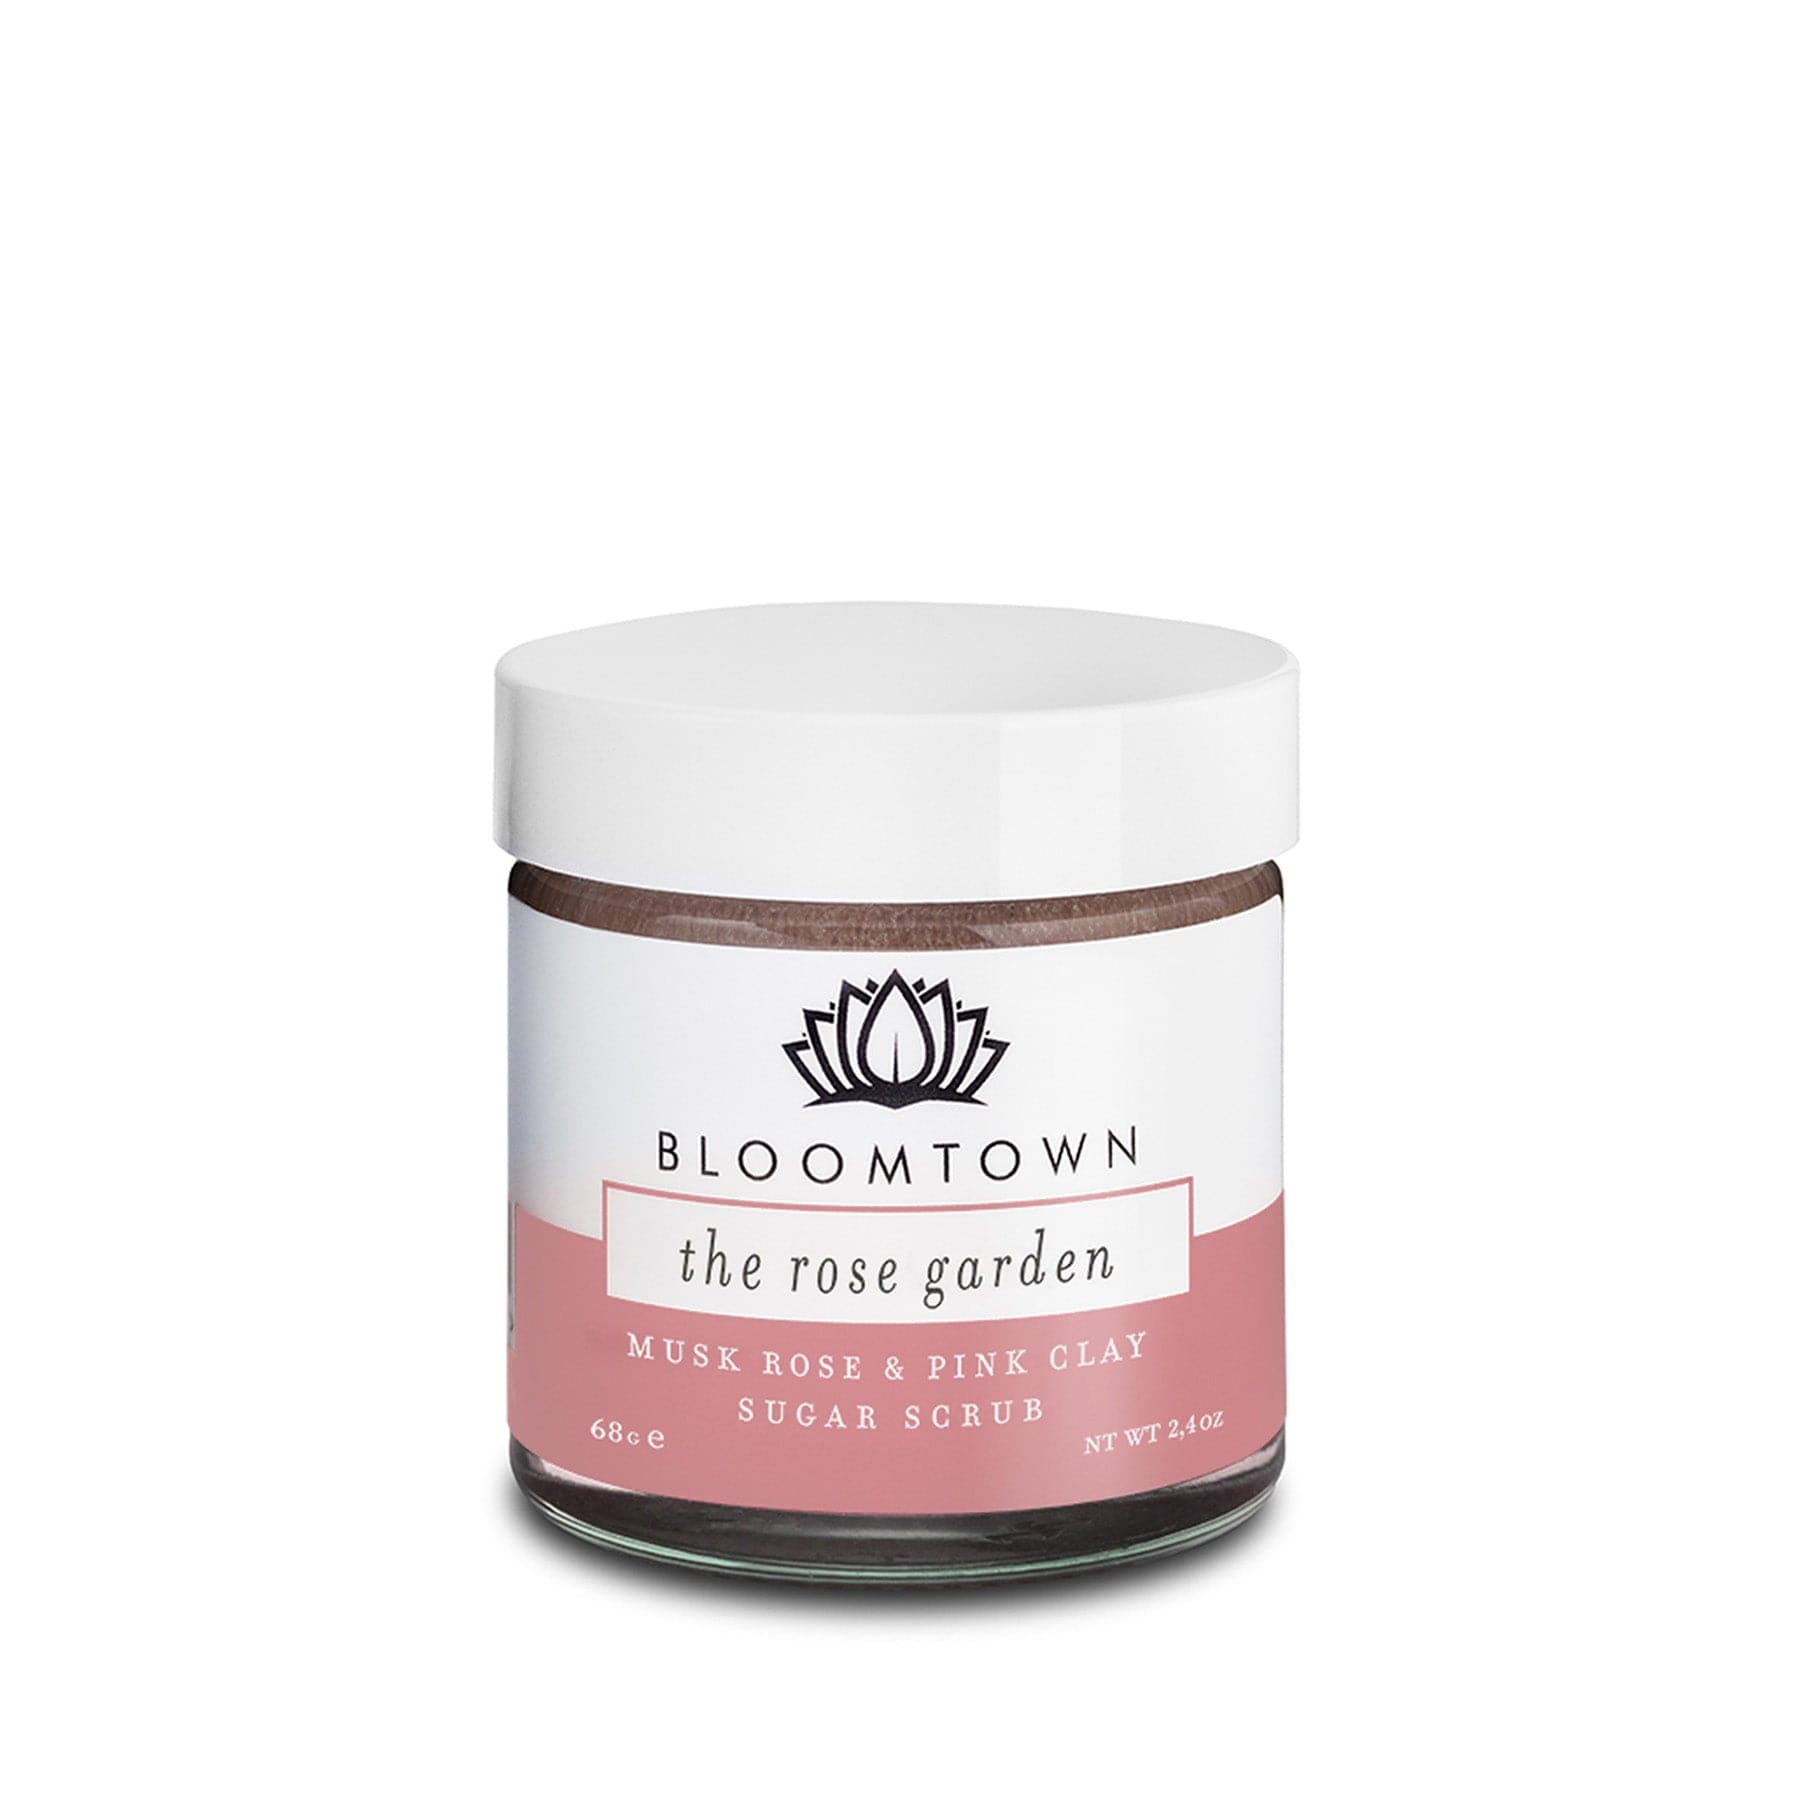 Bloomtown The Rose Garden sugar scrub with musk rose and pink clay in white jar on isolated background.